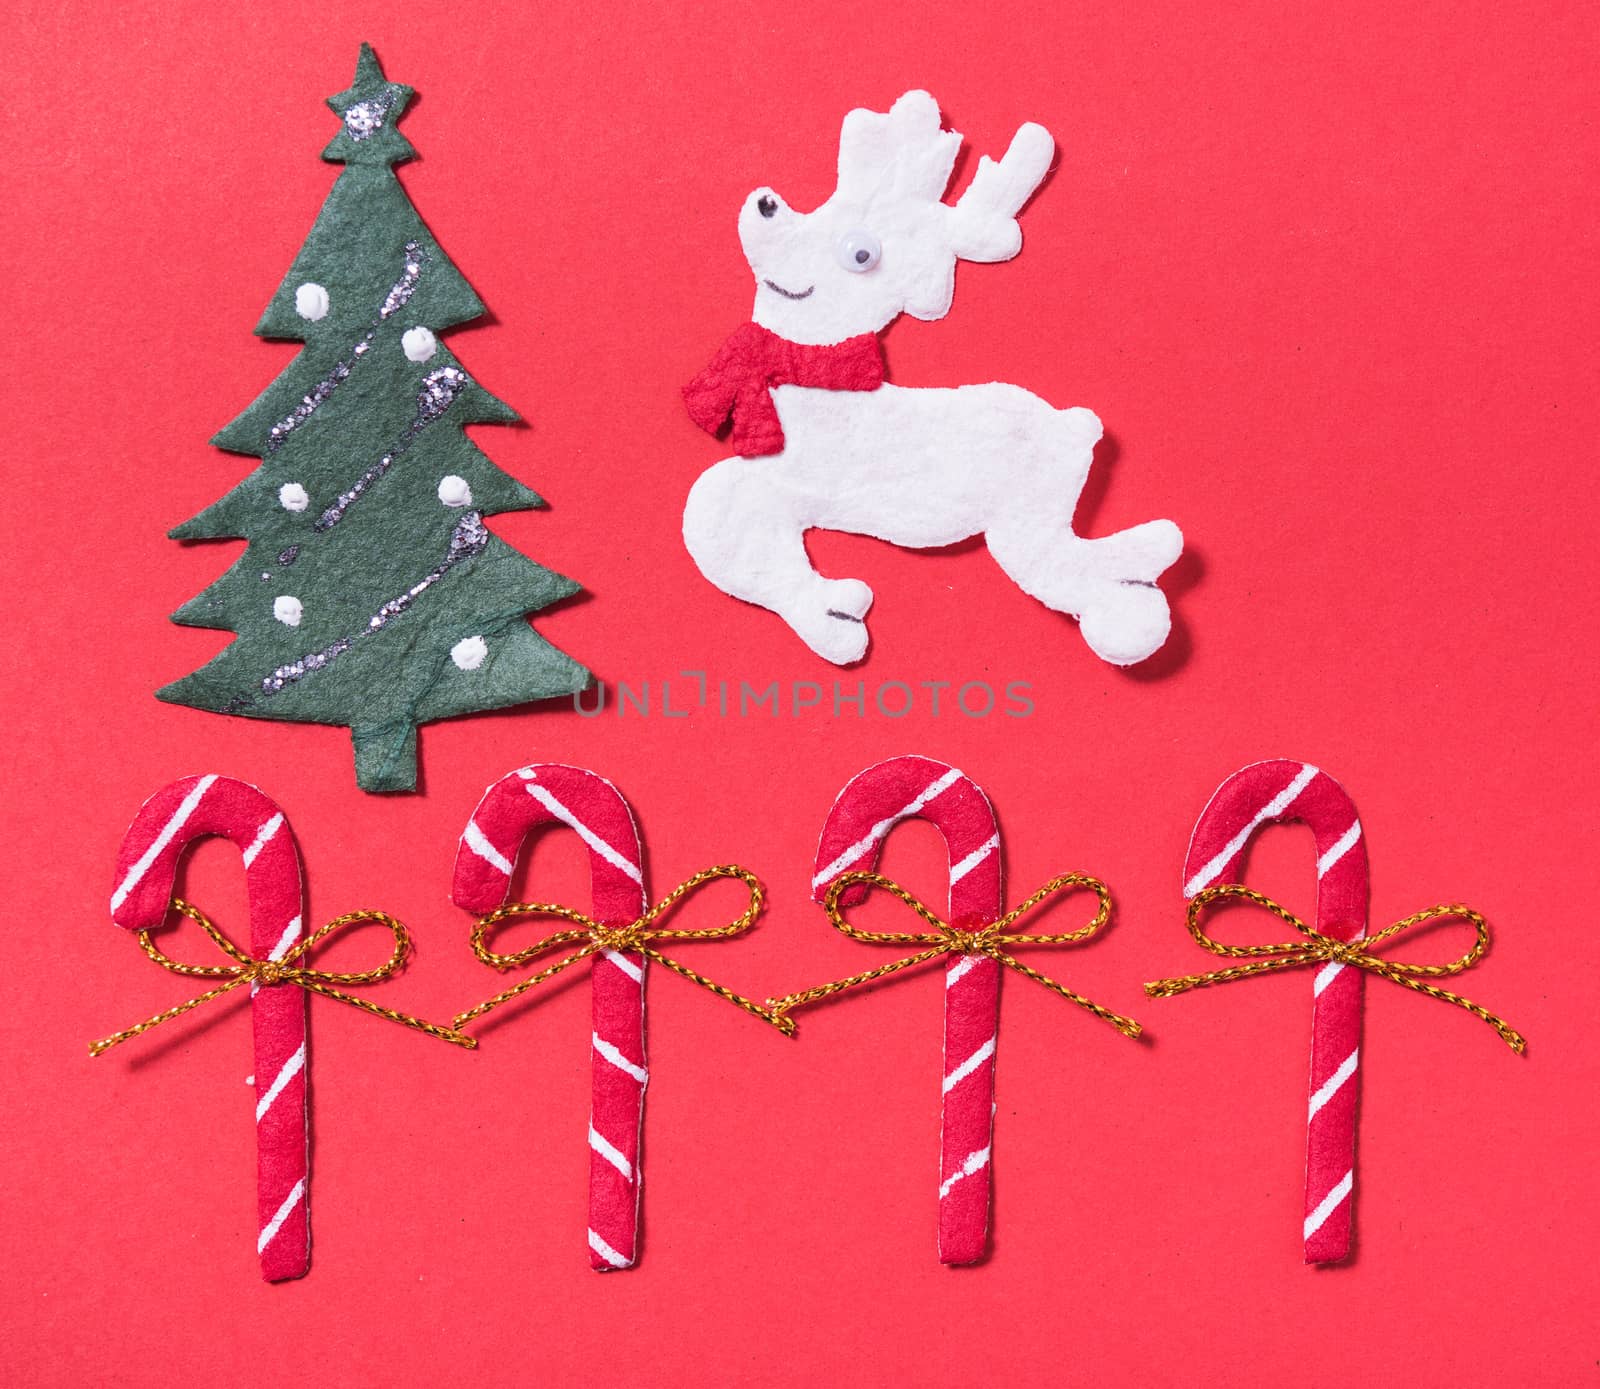 Christmas candies candy cane, deer, and tree by Sorapop